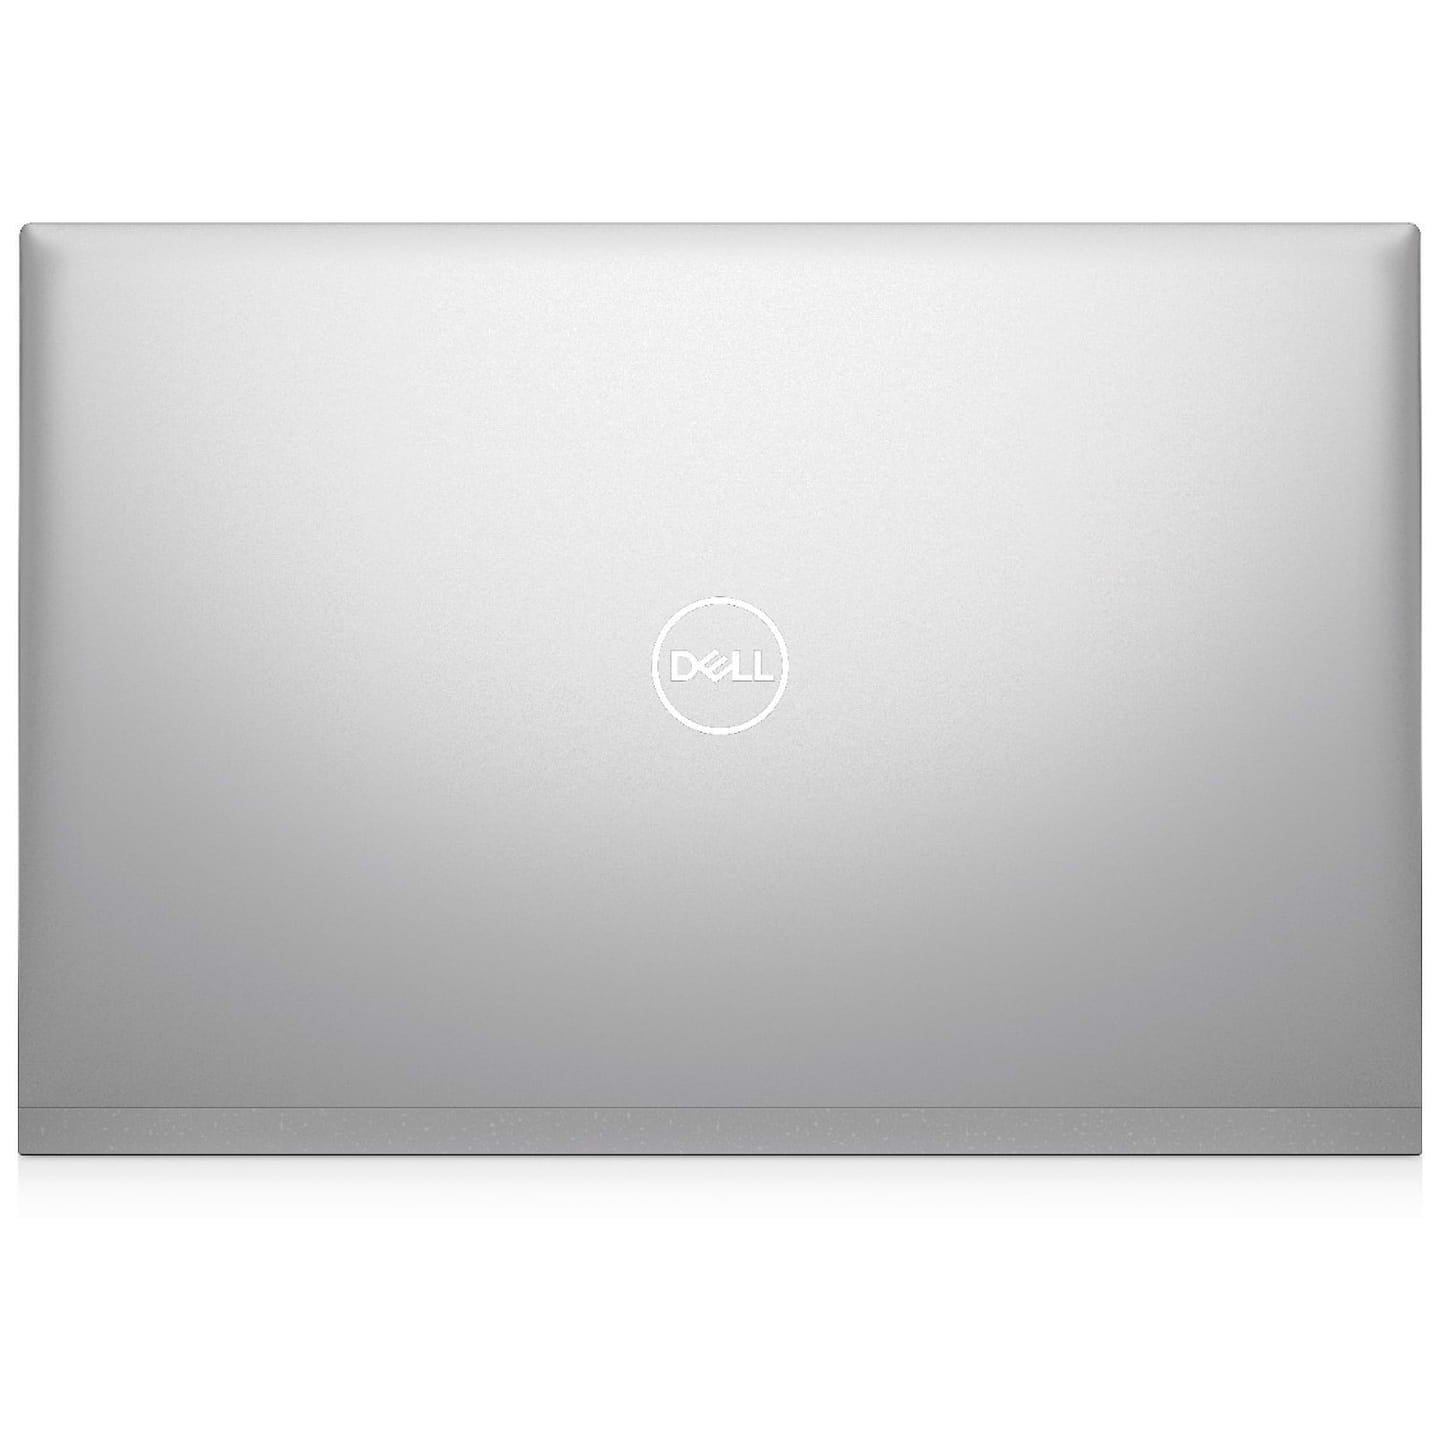 Dell D560481WIN9S Inspiron laptop